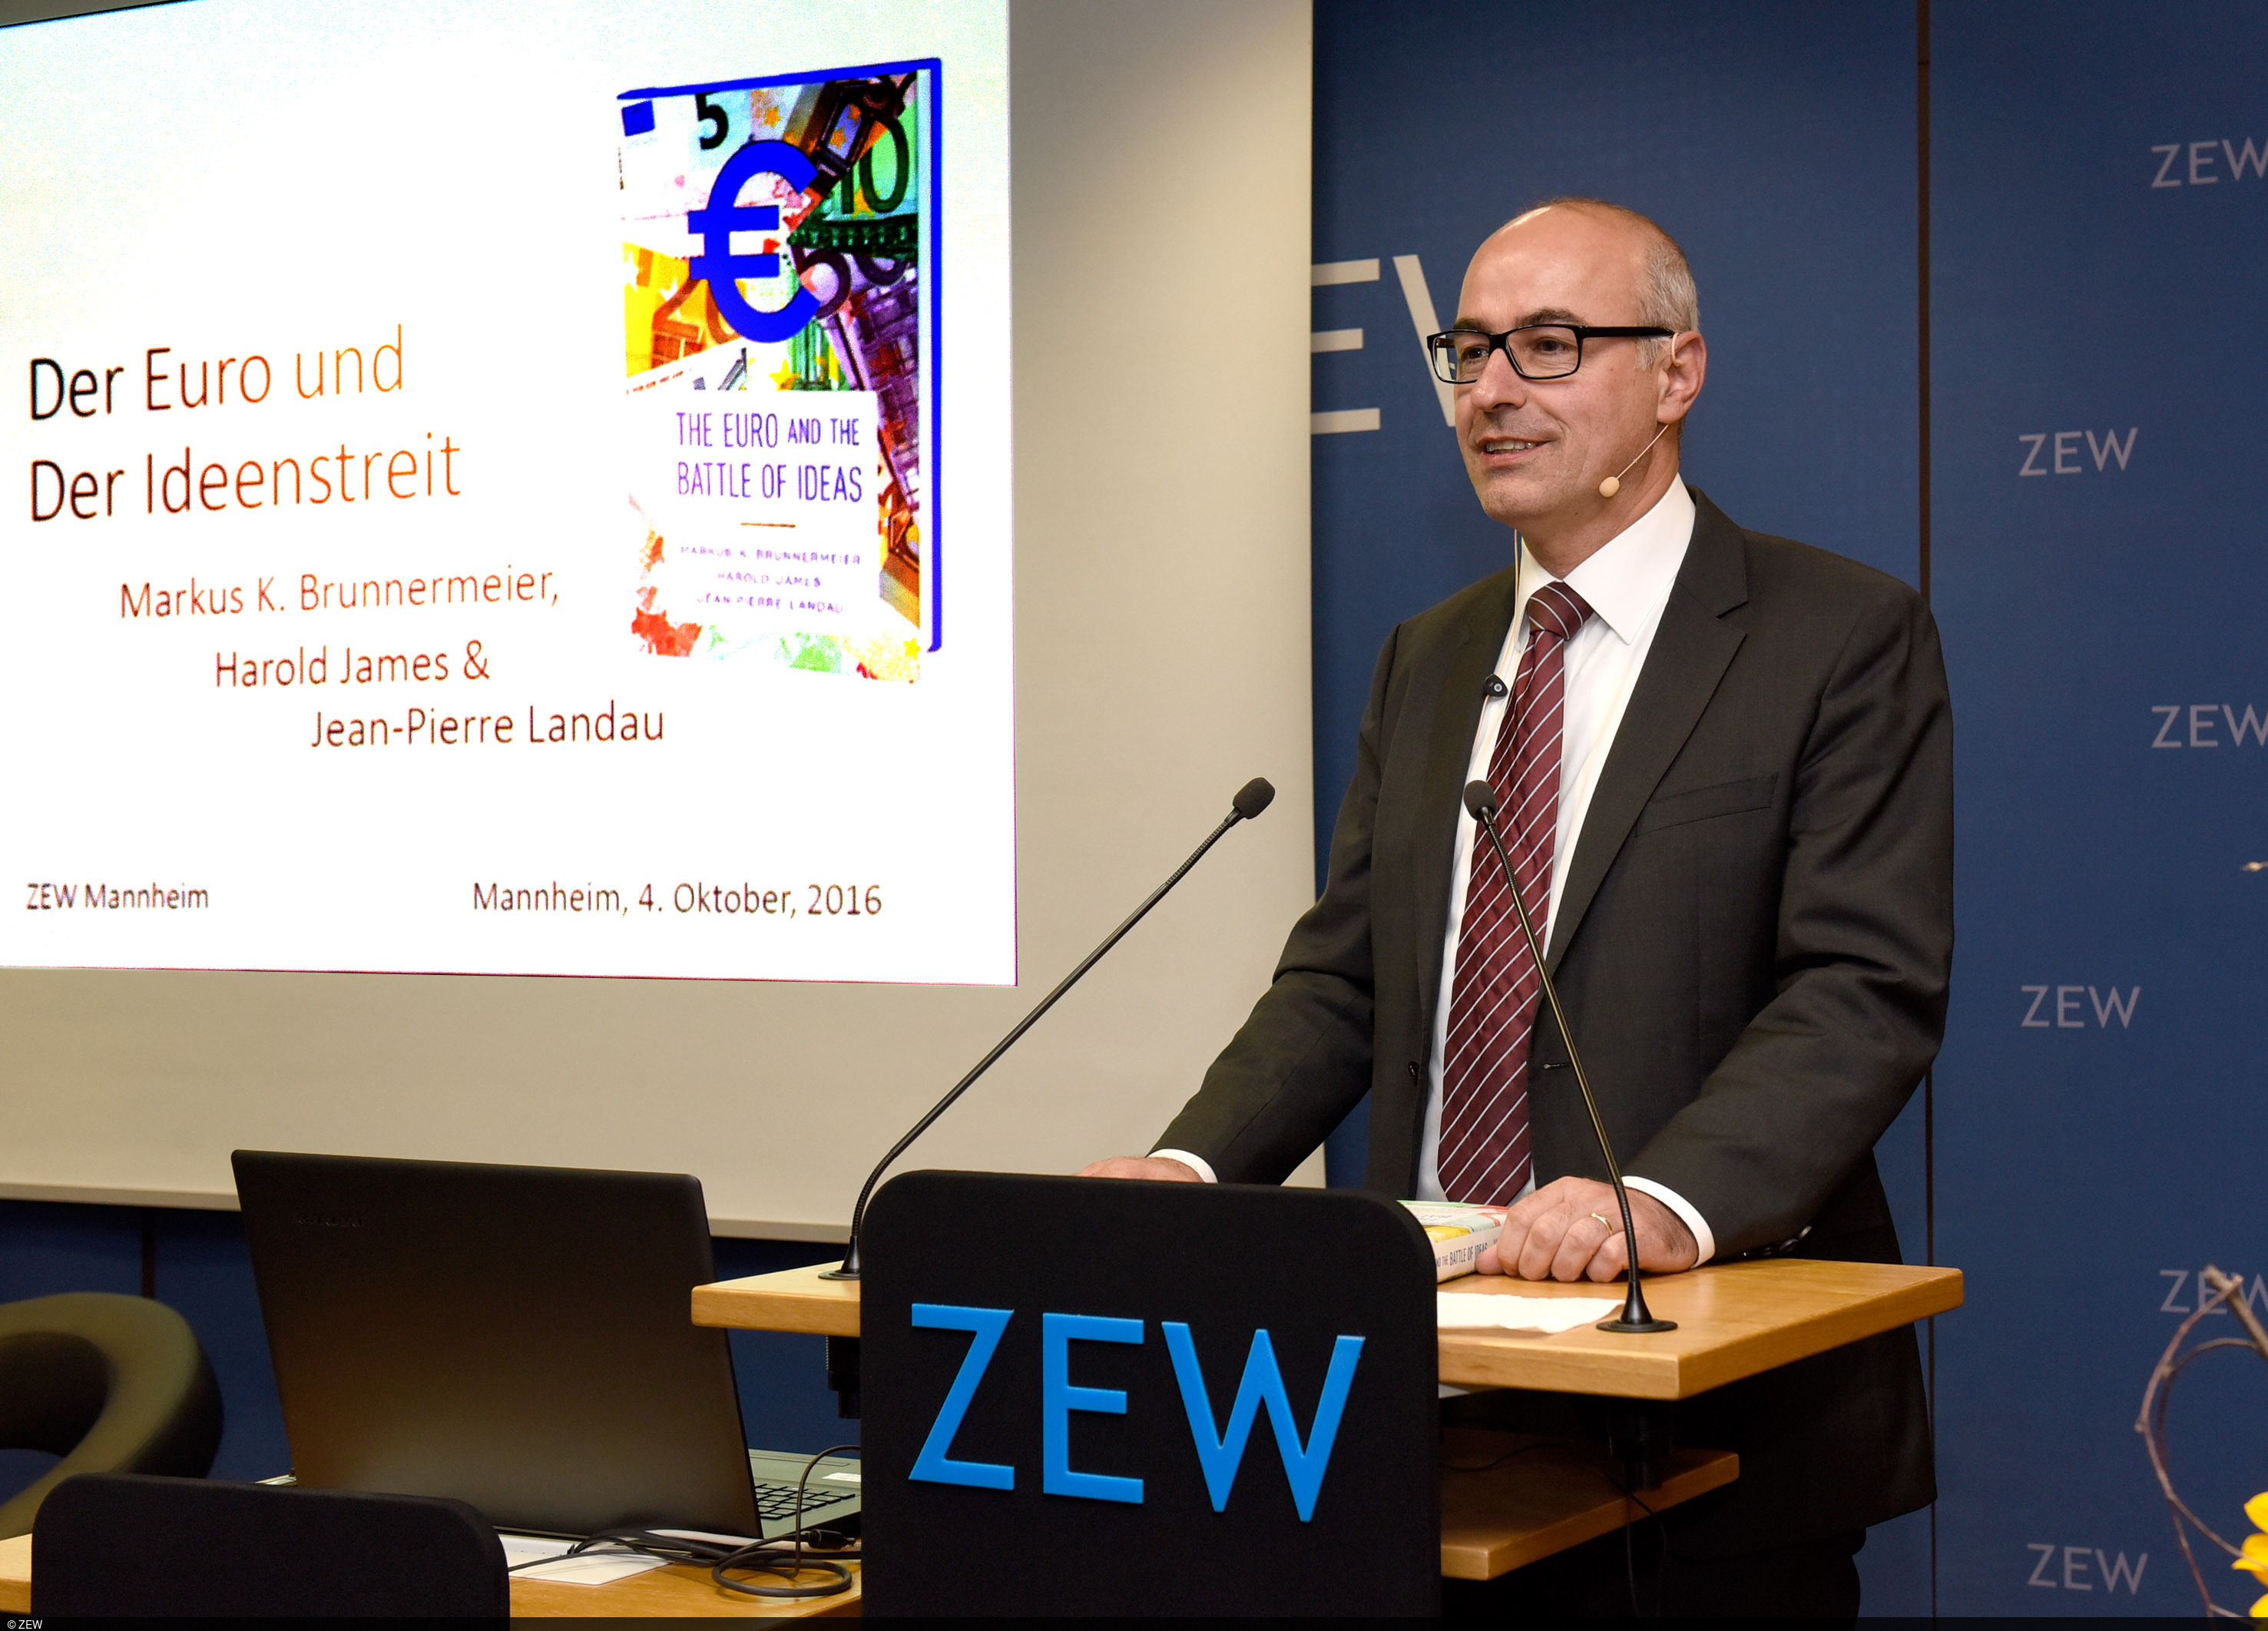 Markus Brunnemeier presents key ideas from his book "The Euro and the Battle of Ideas"